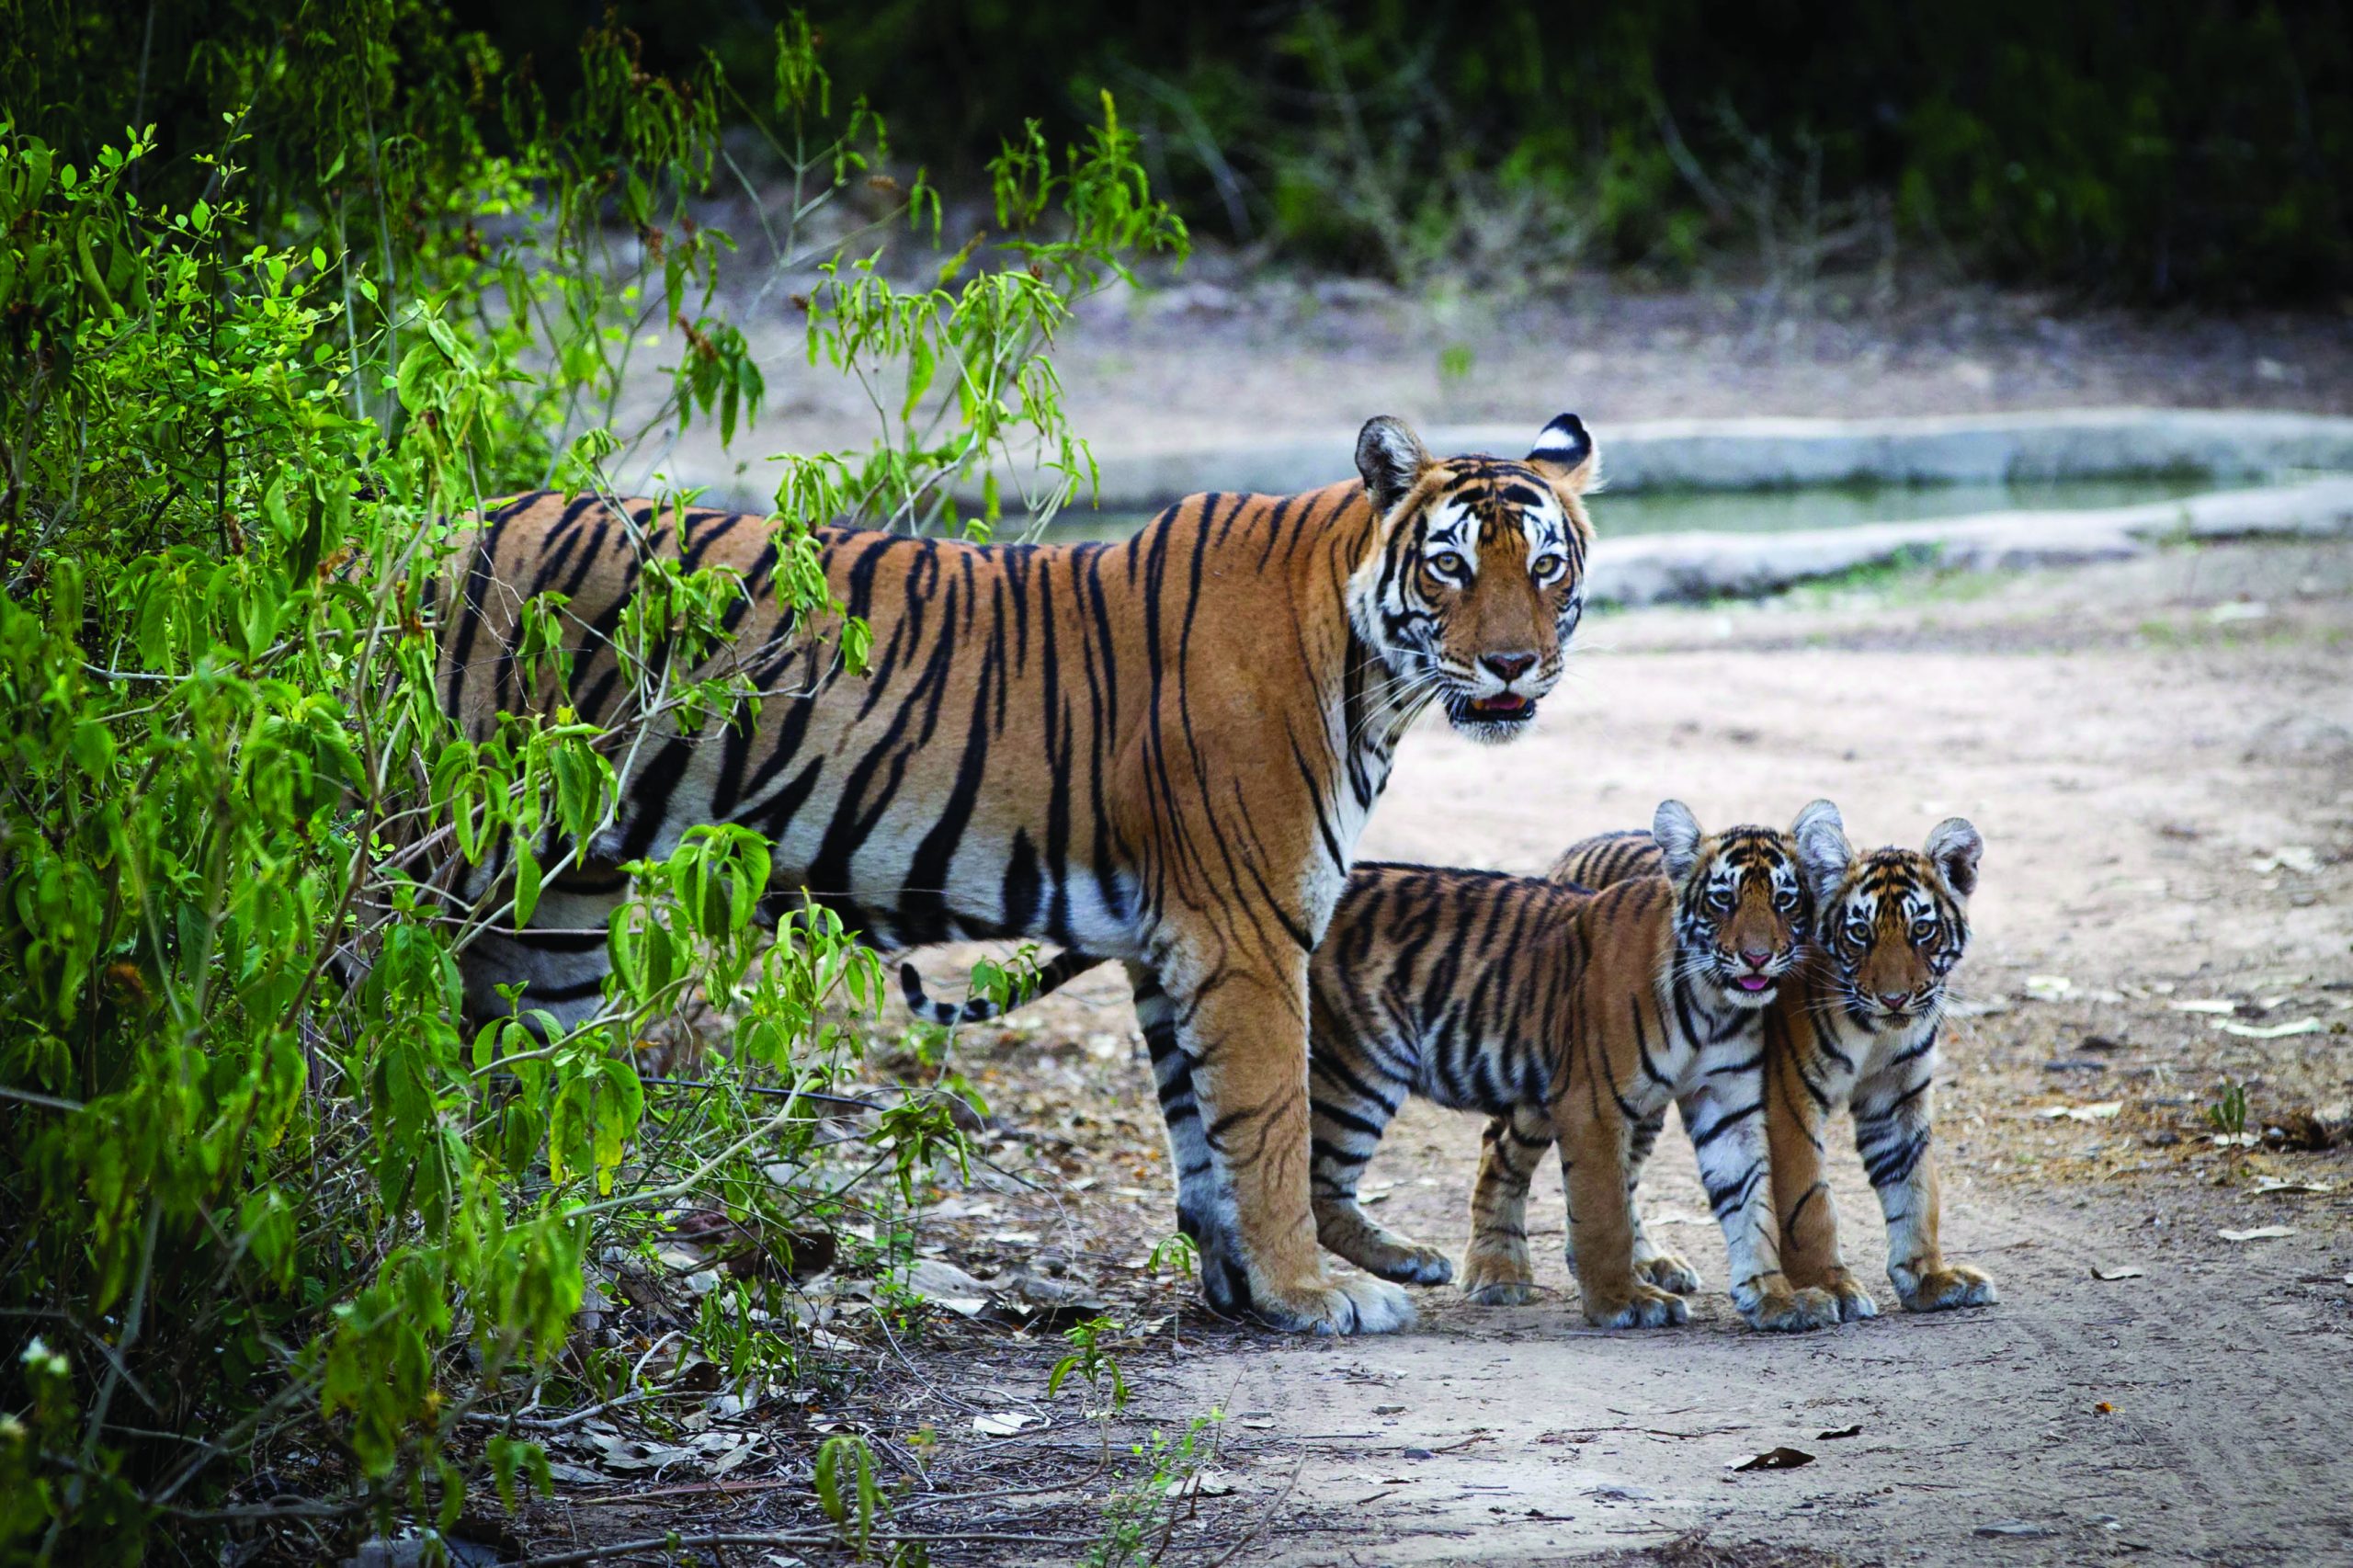 A mother tiger standing with two cubs at the entrance to a woodland area